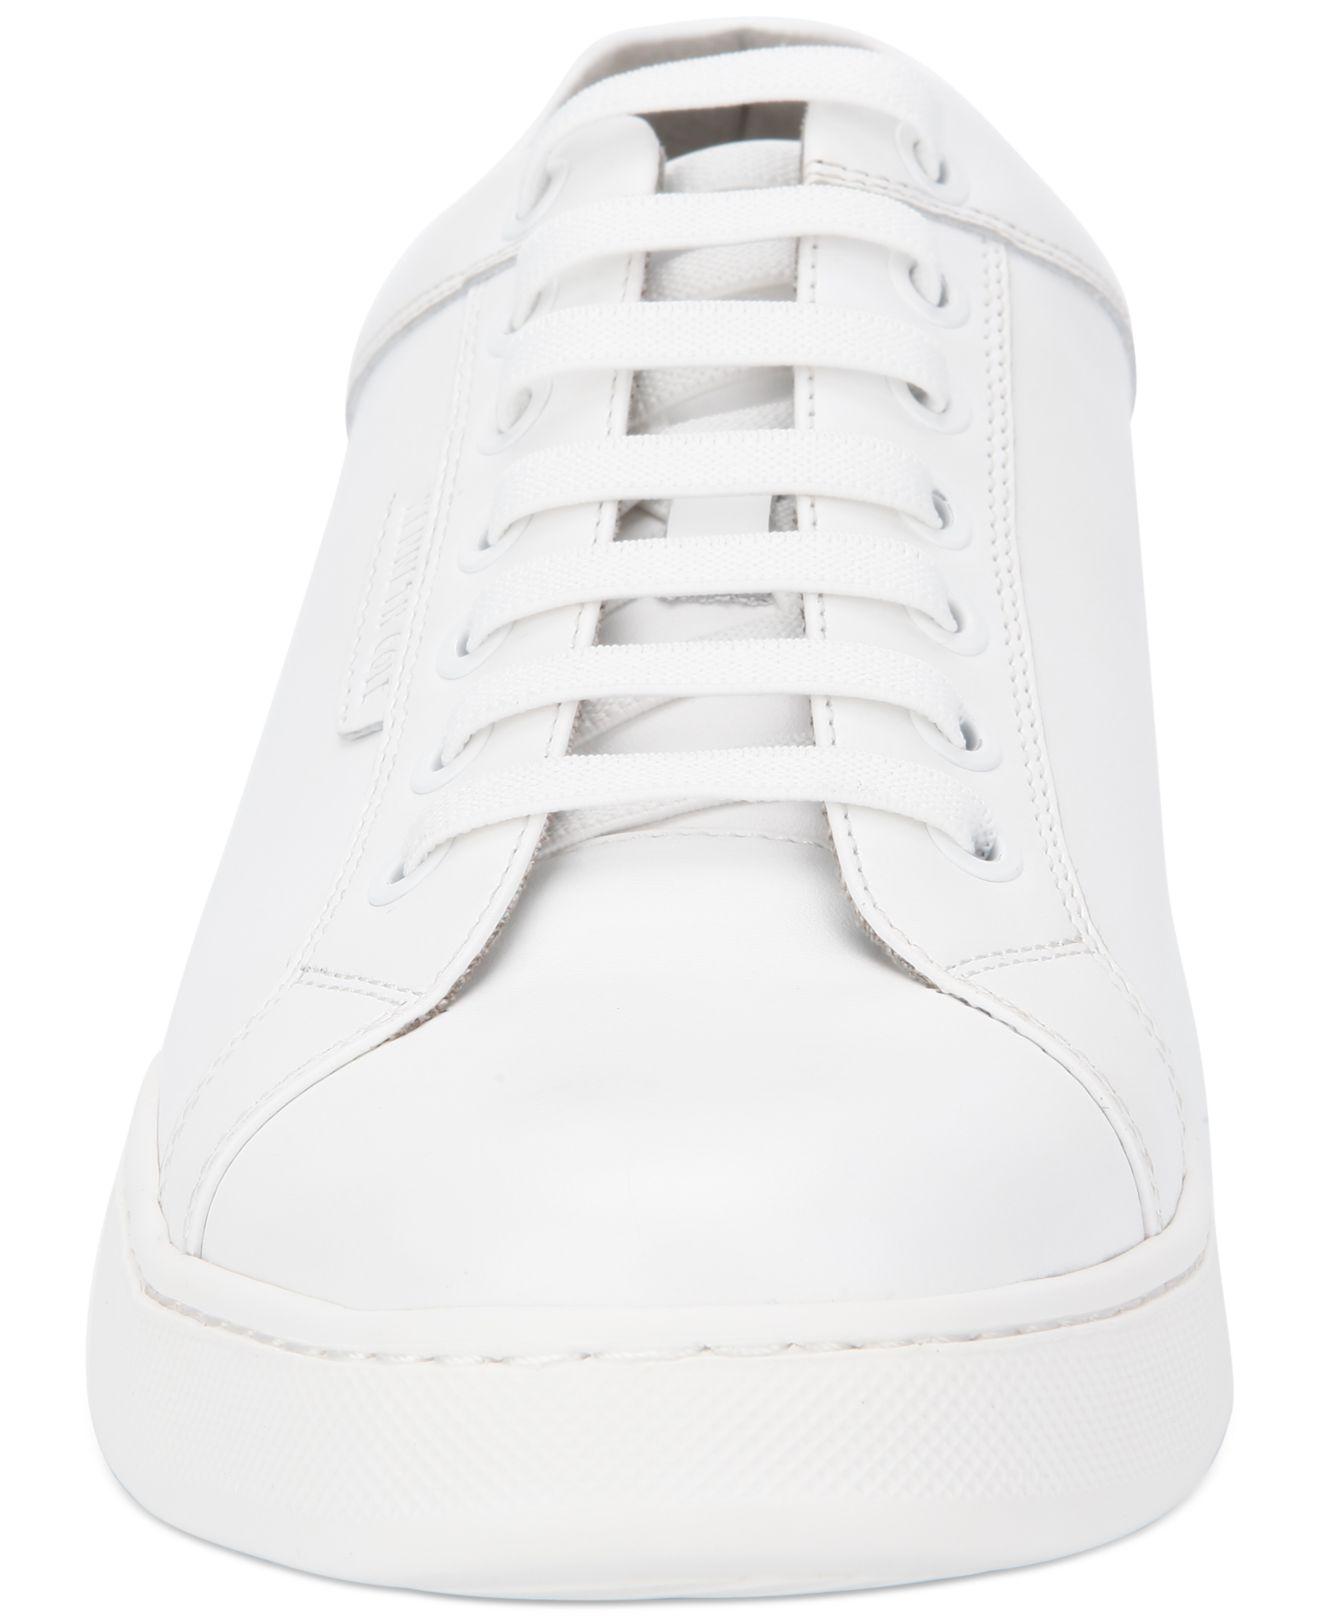 Kenneth Cole Denim Liam Tennis-style Sneakers in White for Men - Lyst